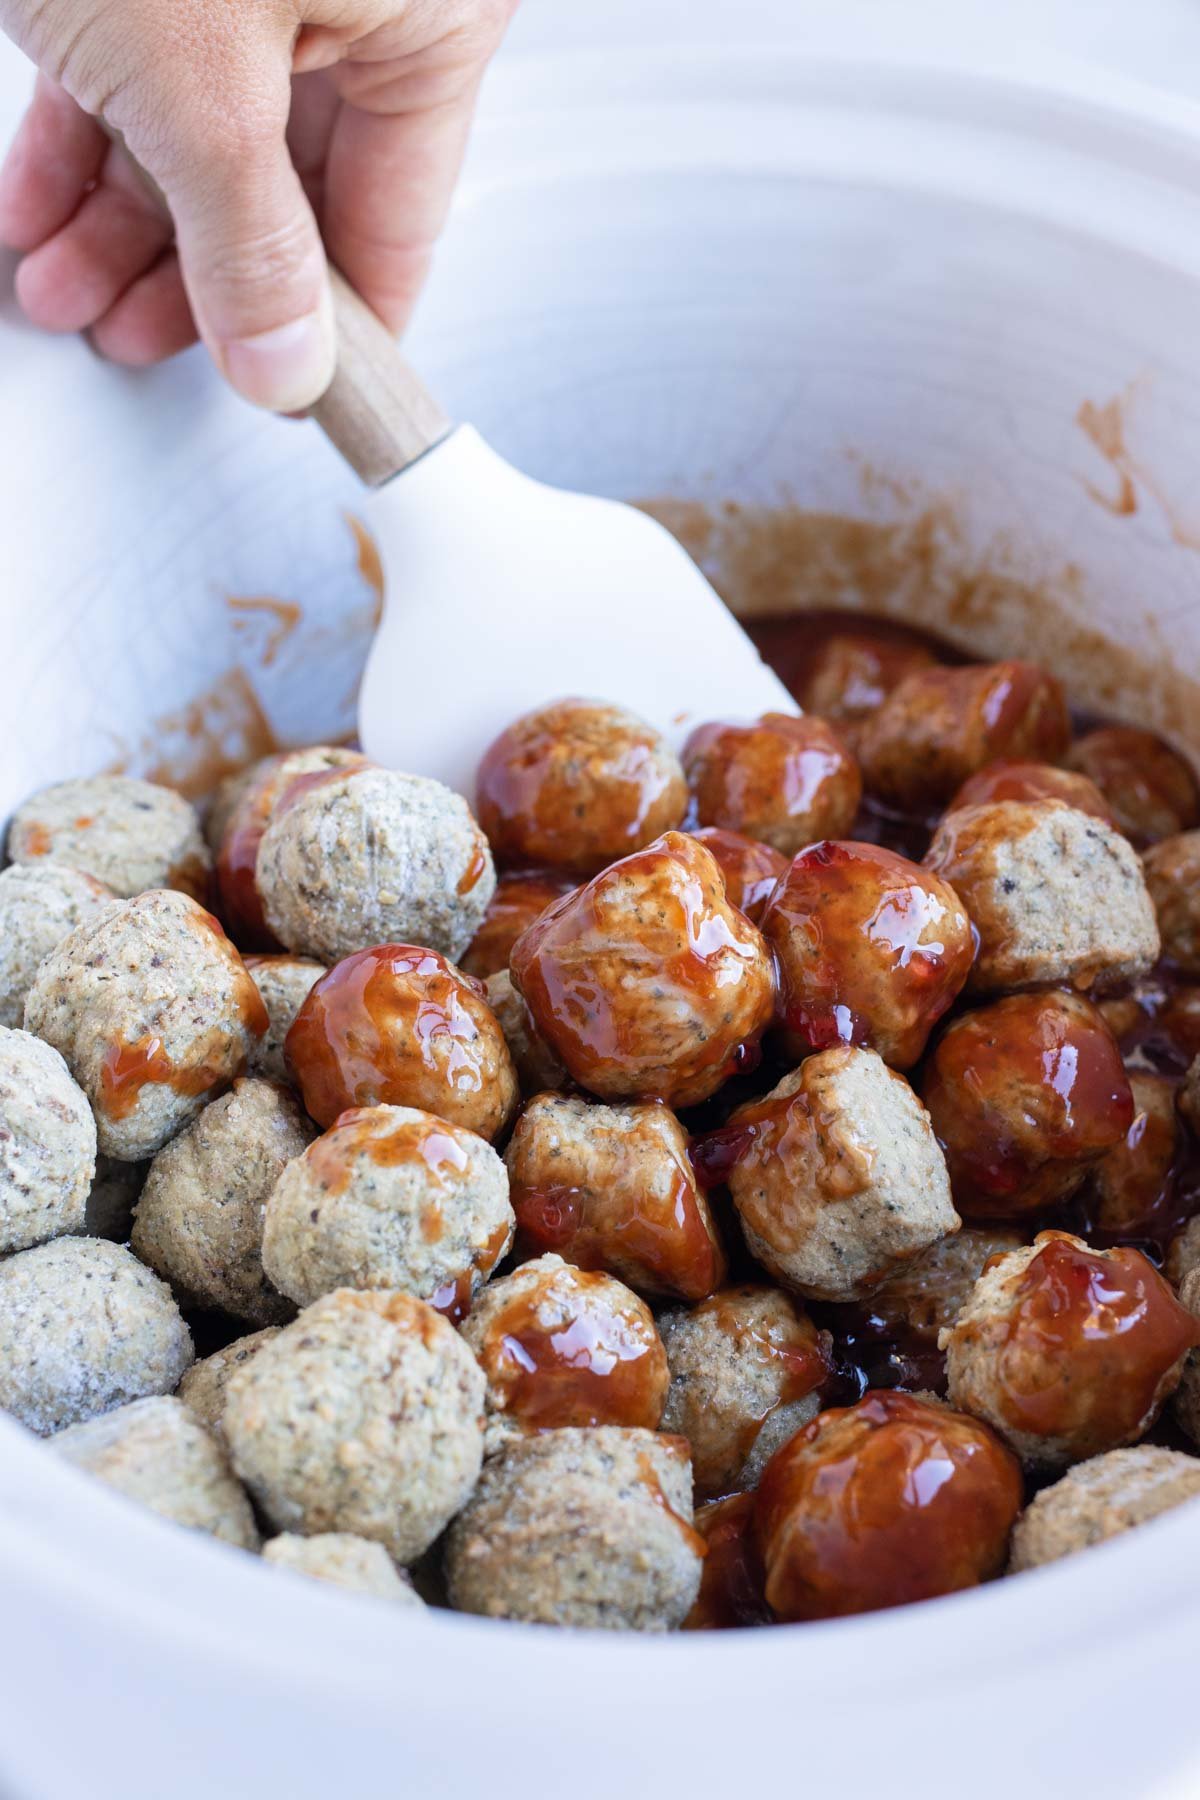 Meatballs are added to the slow cooker.